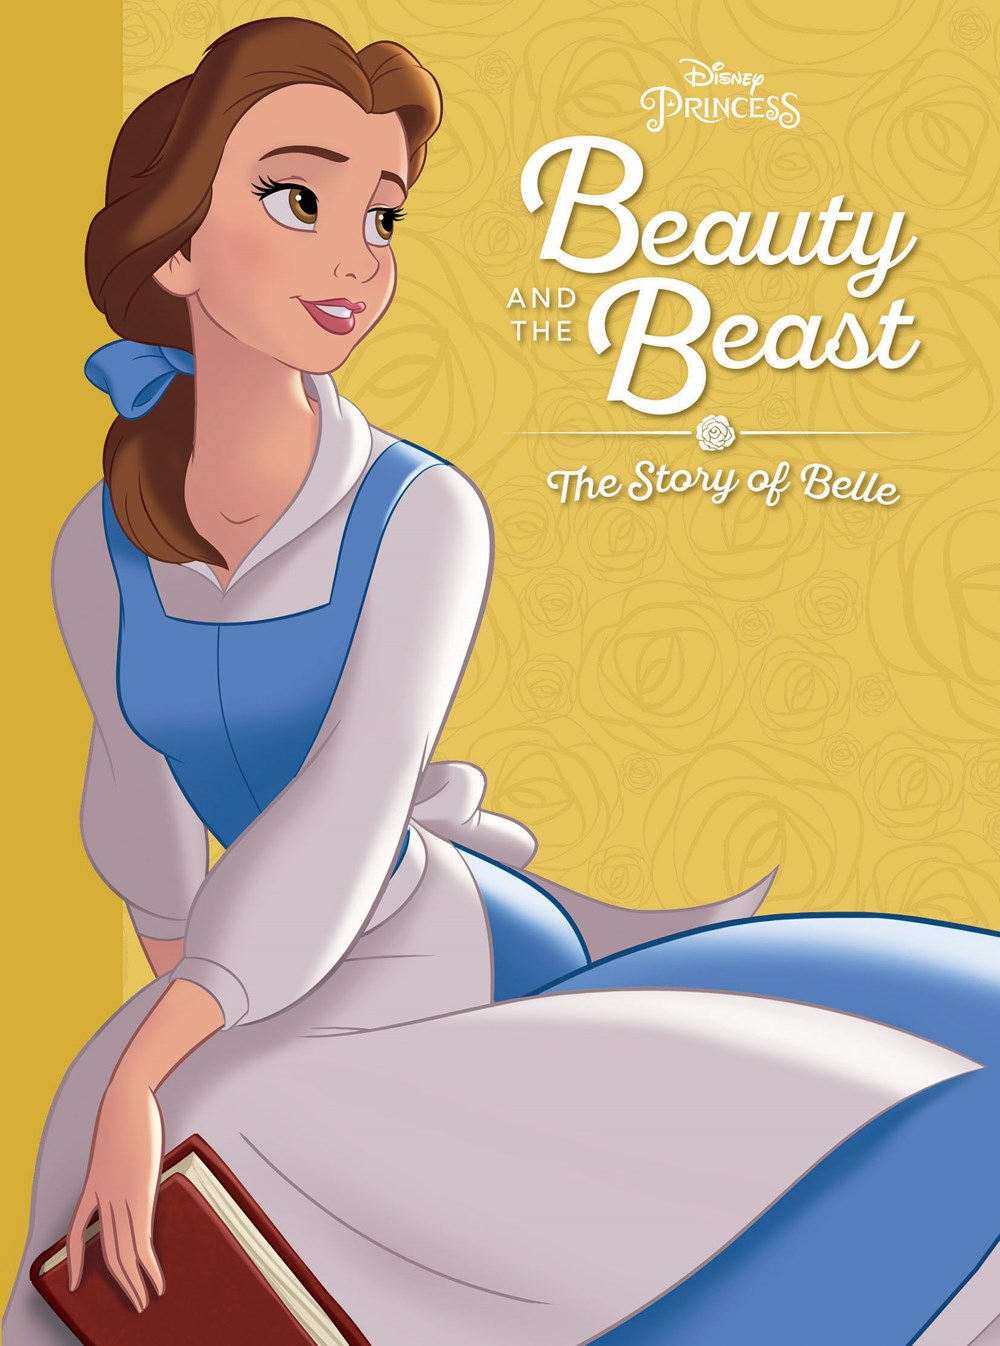 Beauty and the Beast: The Story of Belle by - Beauty and the Beast